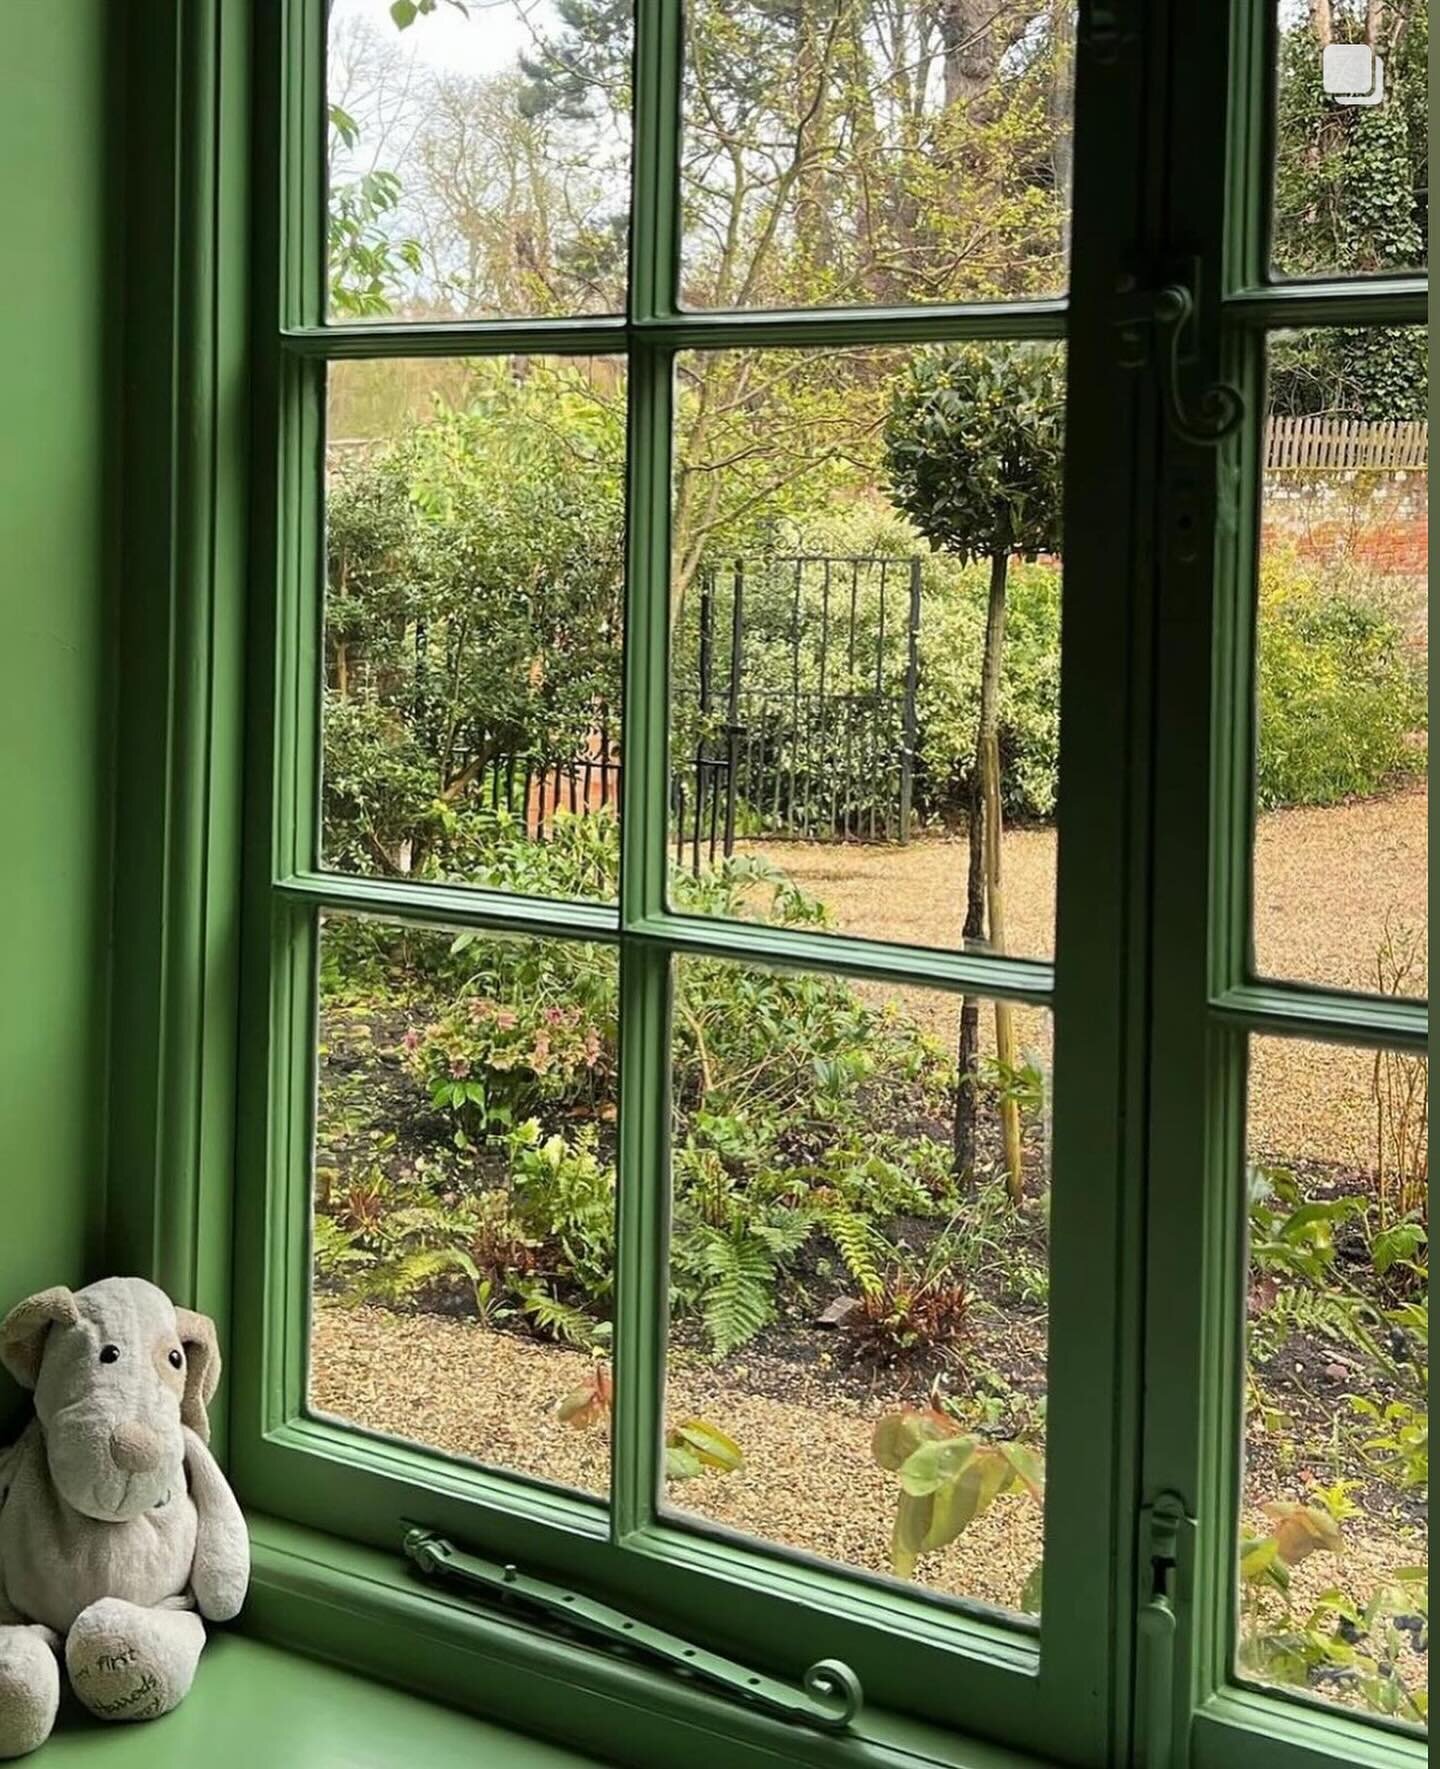 A playroom nestled in nature with teddy having a thoughtful moment watching the arrival of Spring #charlottecroftsandco 
.
.
.
.
#naturalpaint #greenroom #springday #edwardbulmerpaint #countryhousestyle #interiordesign #countrylife #interiordesigner 